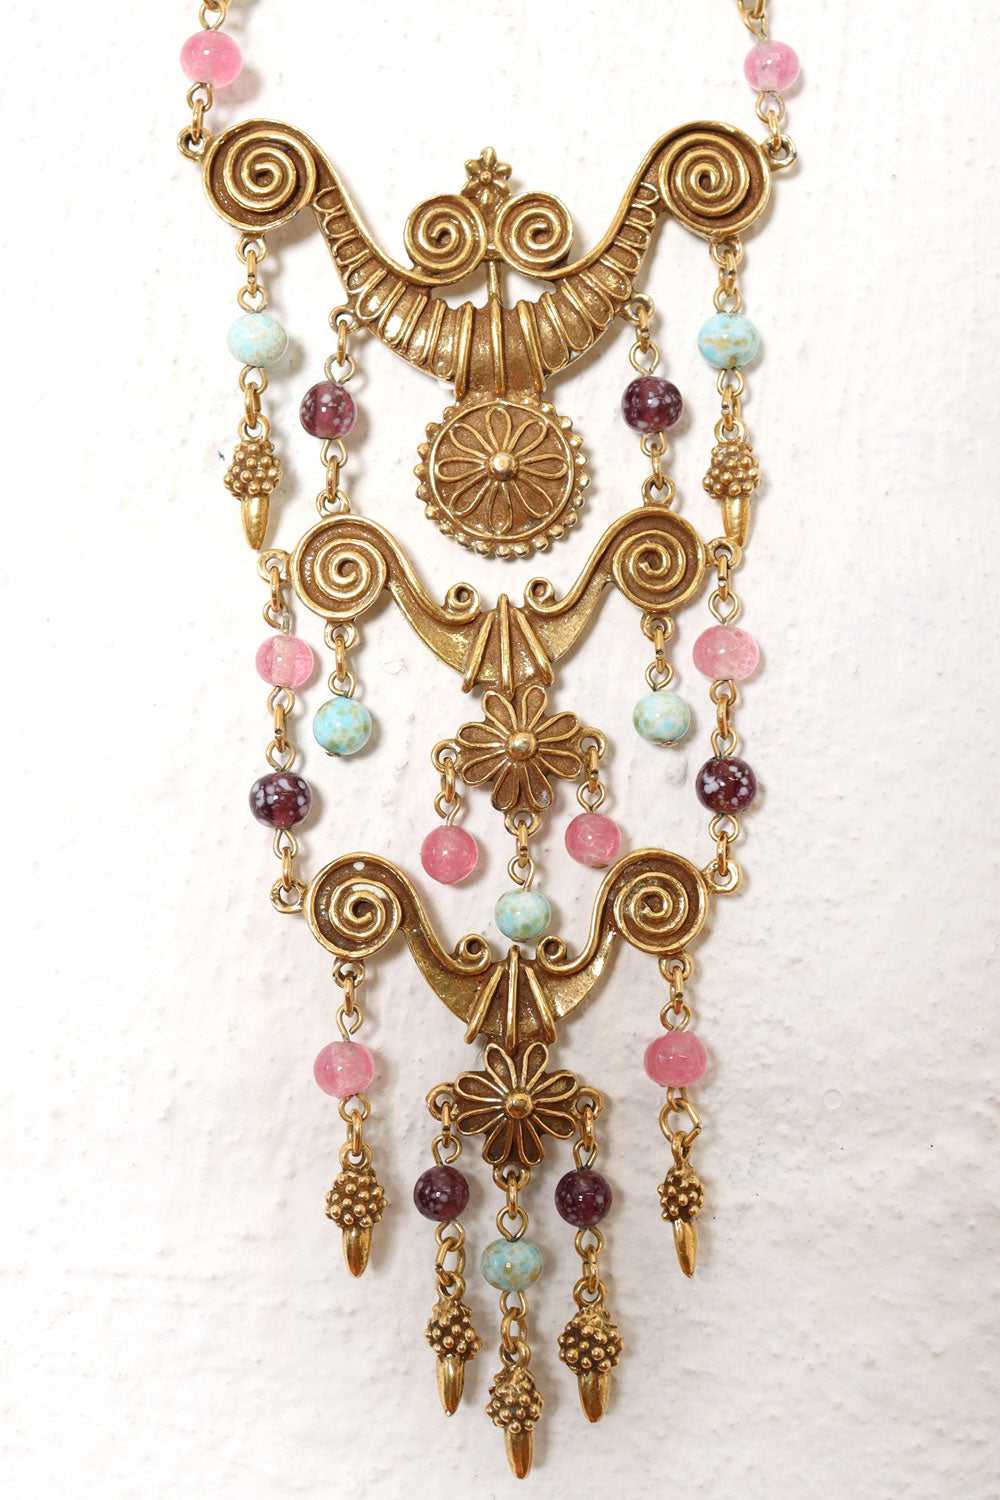 Glass Bead Gilded Statement Necklace - image 3